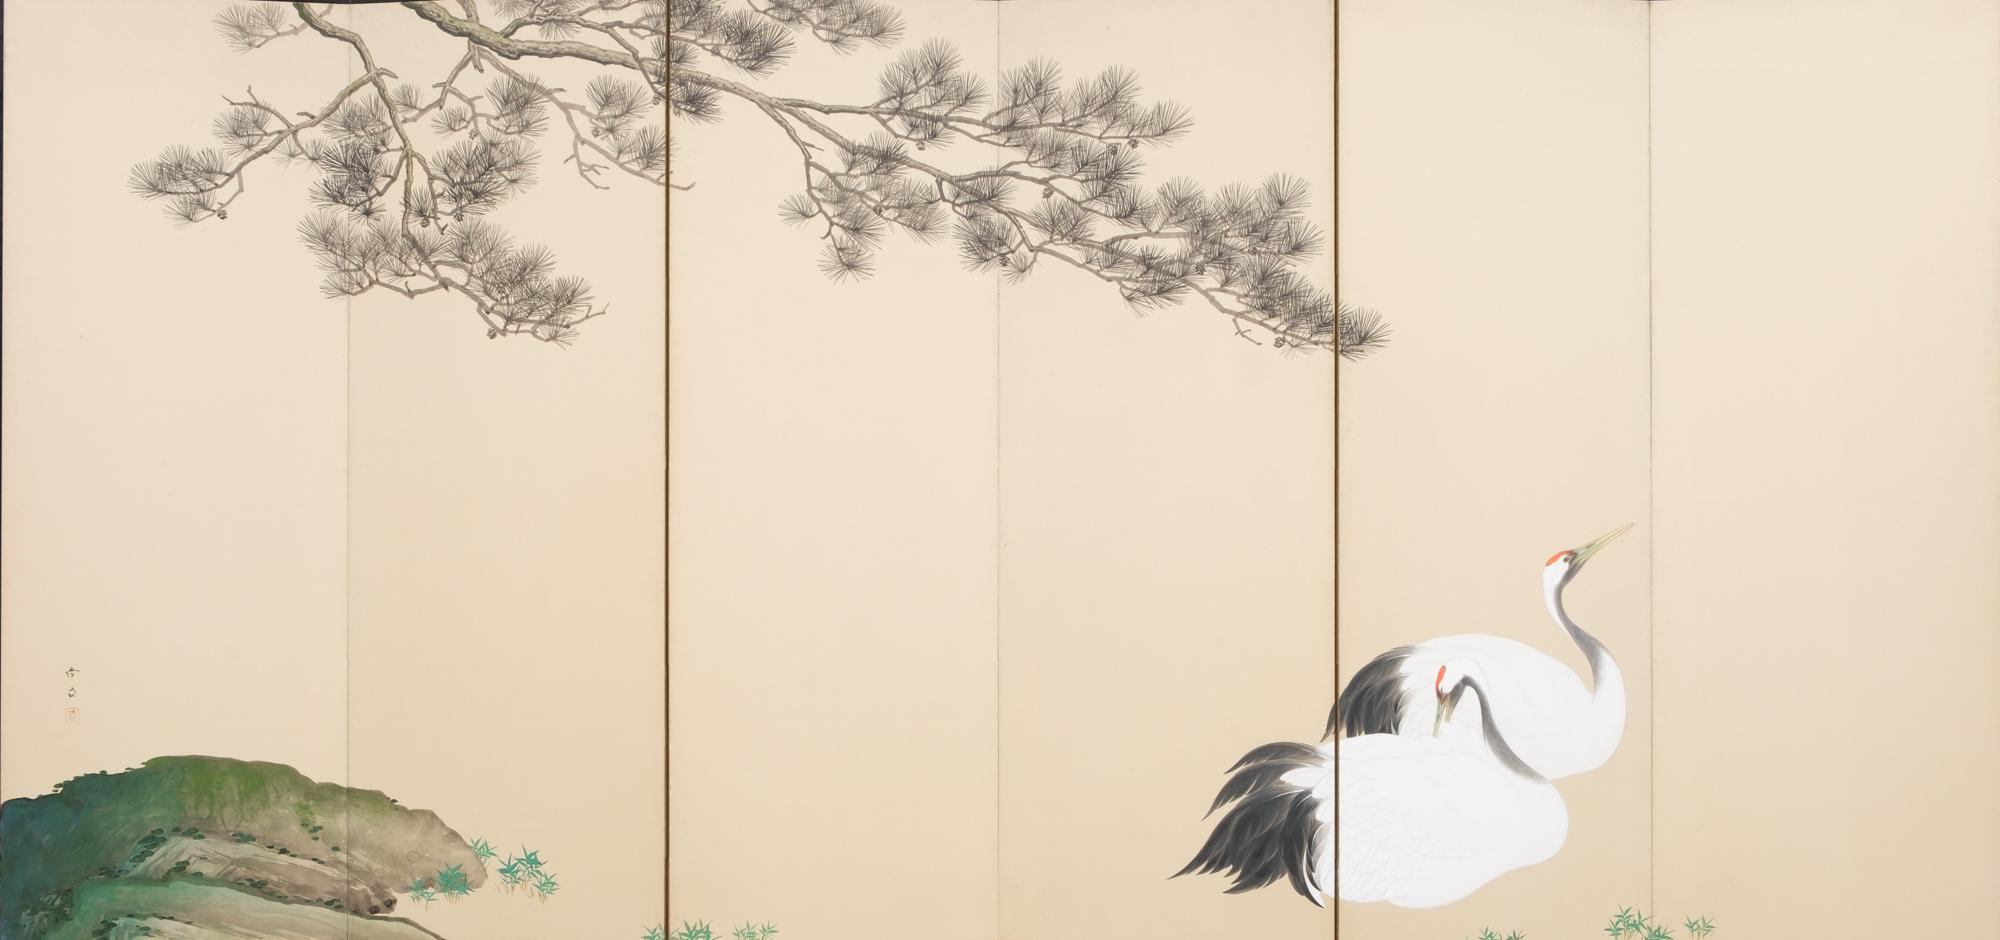 A very beautiful large six-panel byôbu (room-divider) with a refined polychrome painting on paper of a pine tree (matsu) and two cranes (tsuru). 
In Japanese culture, the pine tree is known to represent longevity, good fortune and steadfastness. The